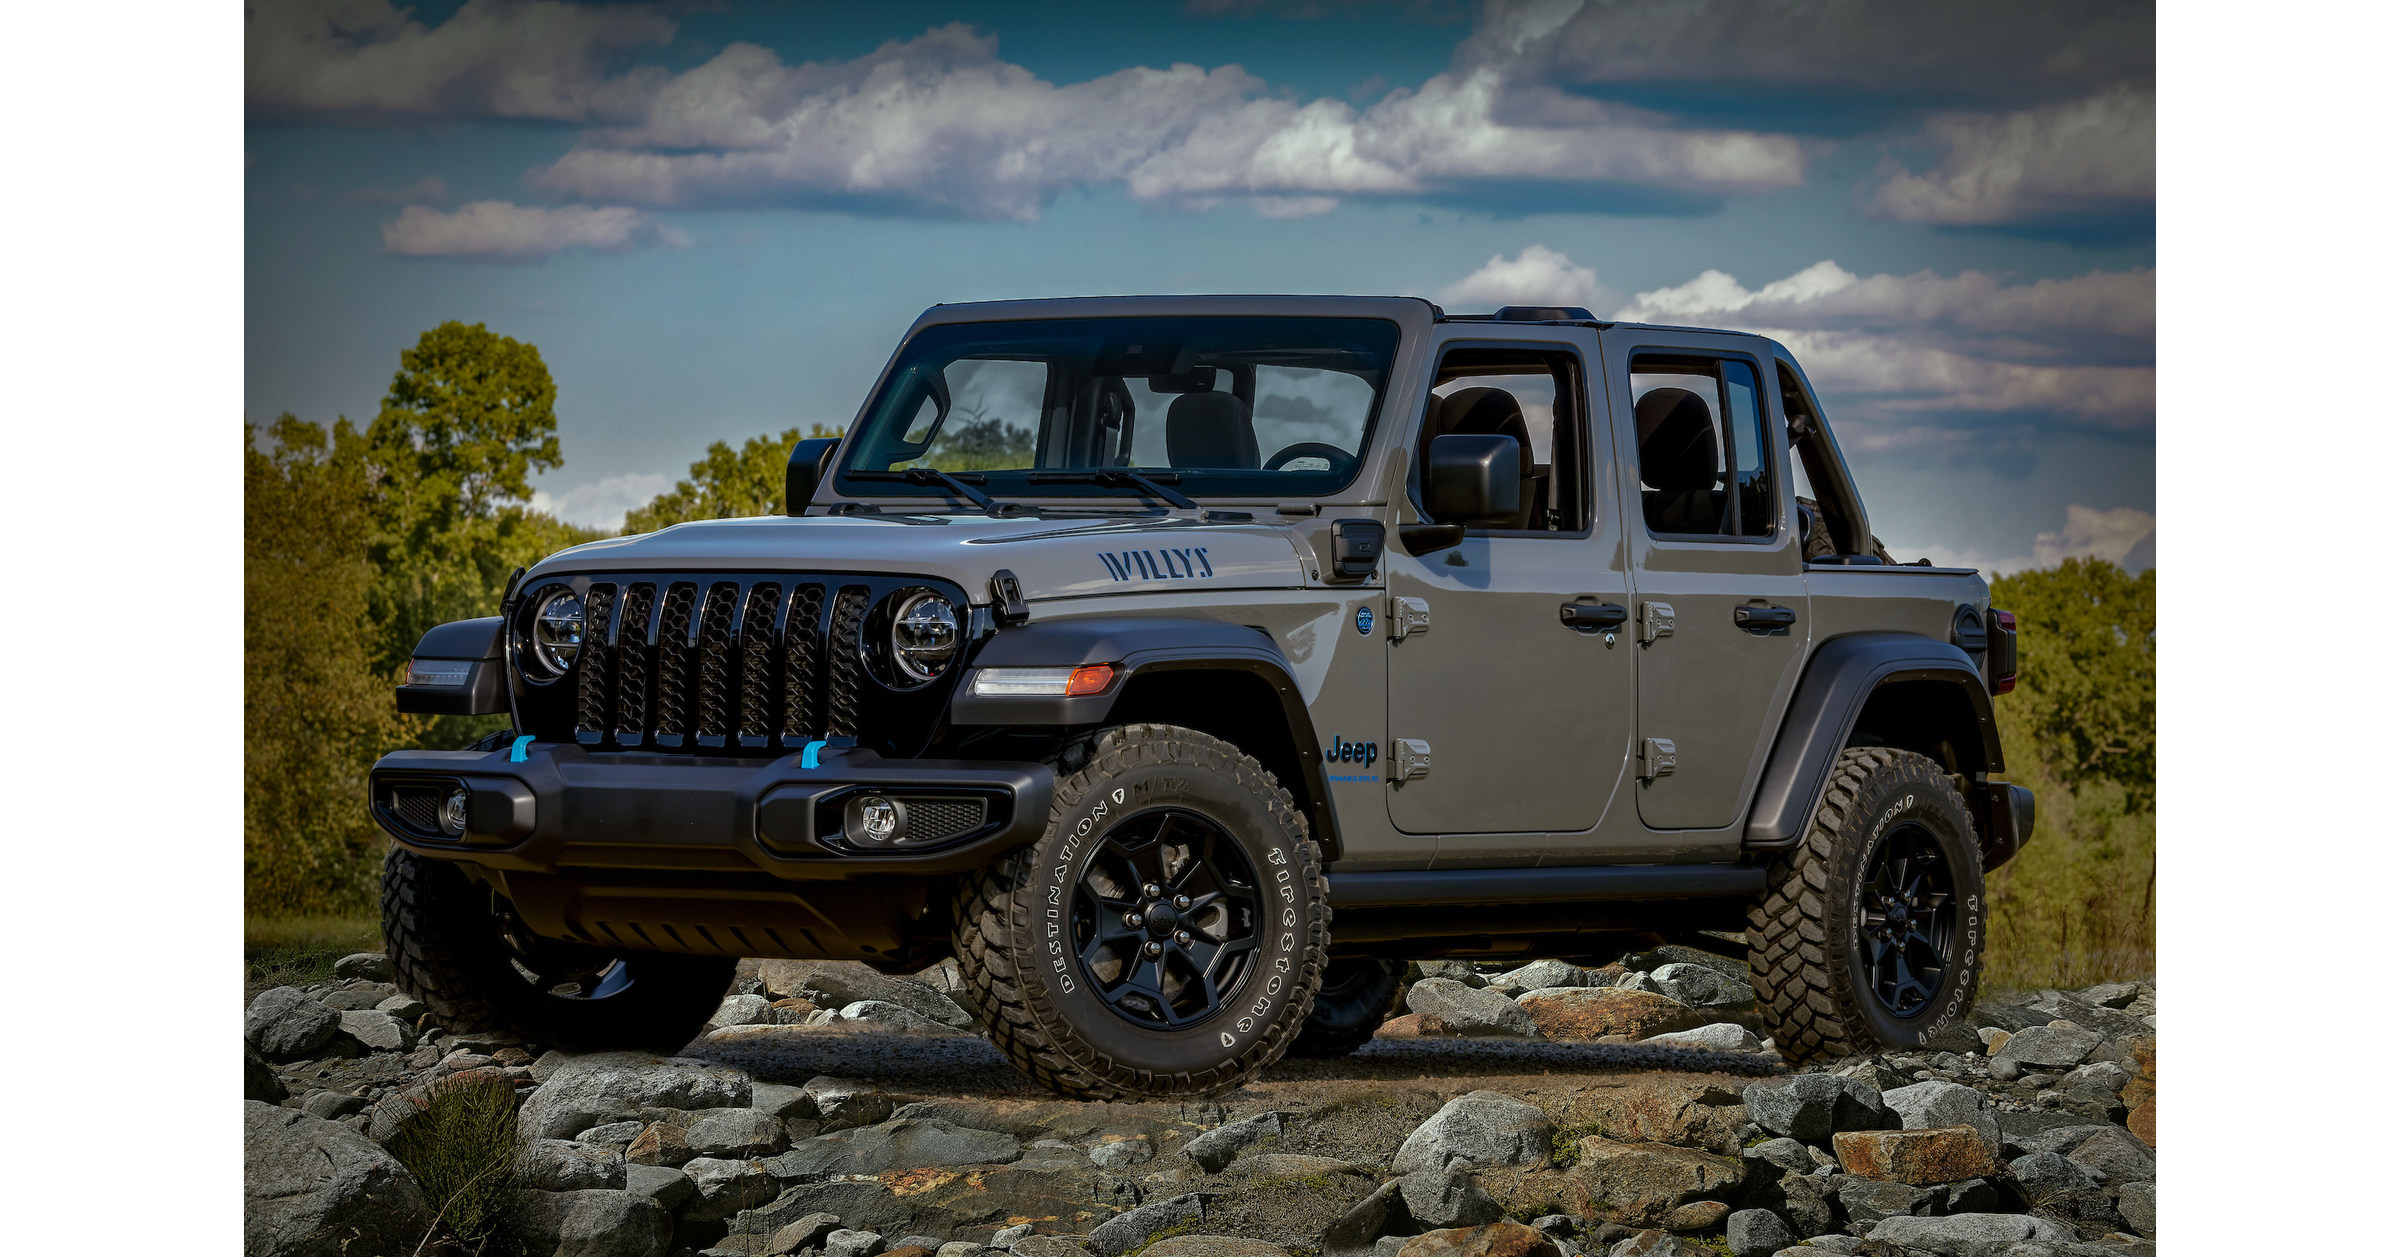 The Trending Products of Early 2023 – The Wrangler